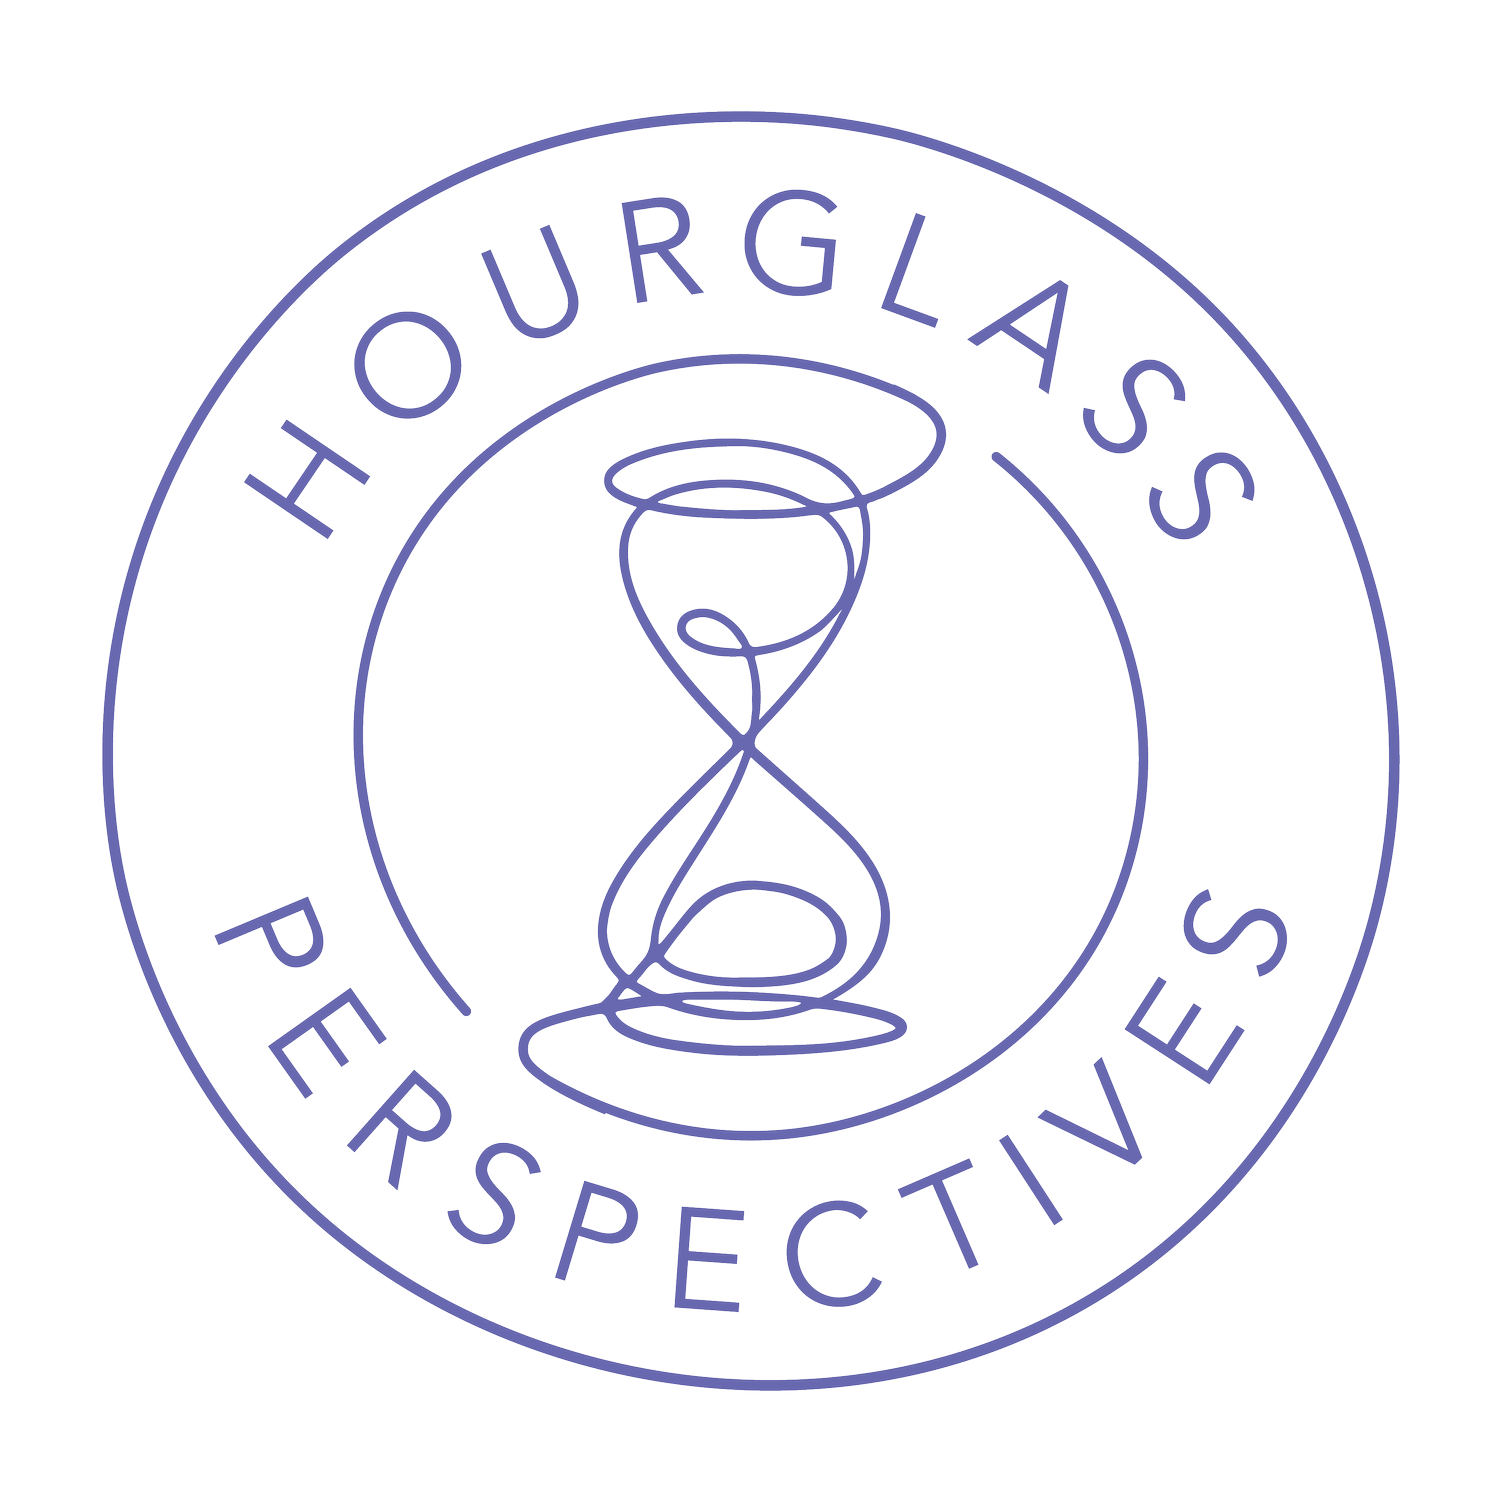 Hourglass Perspectives